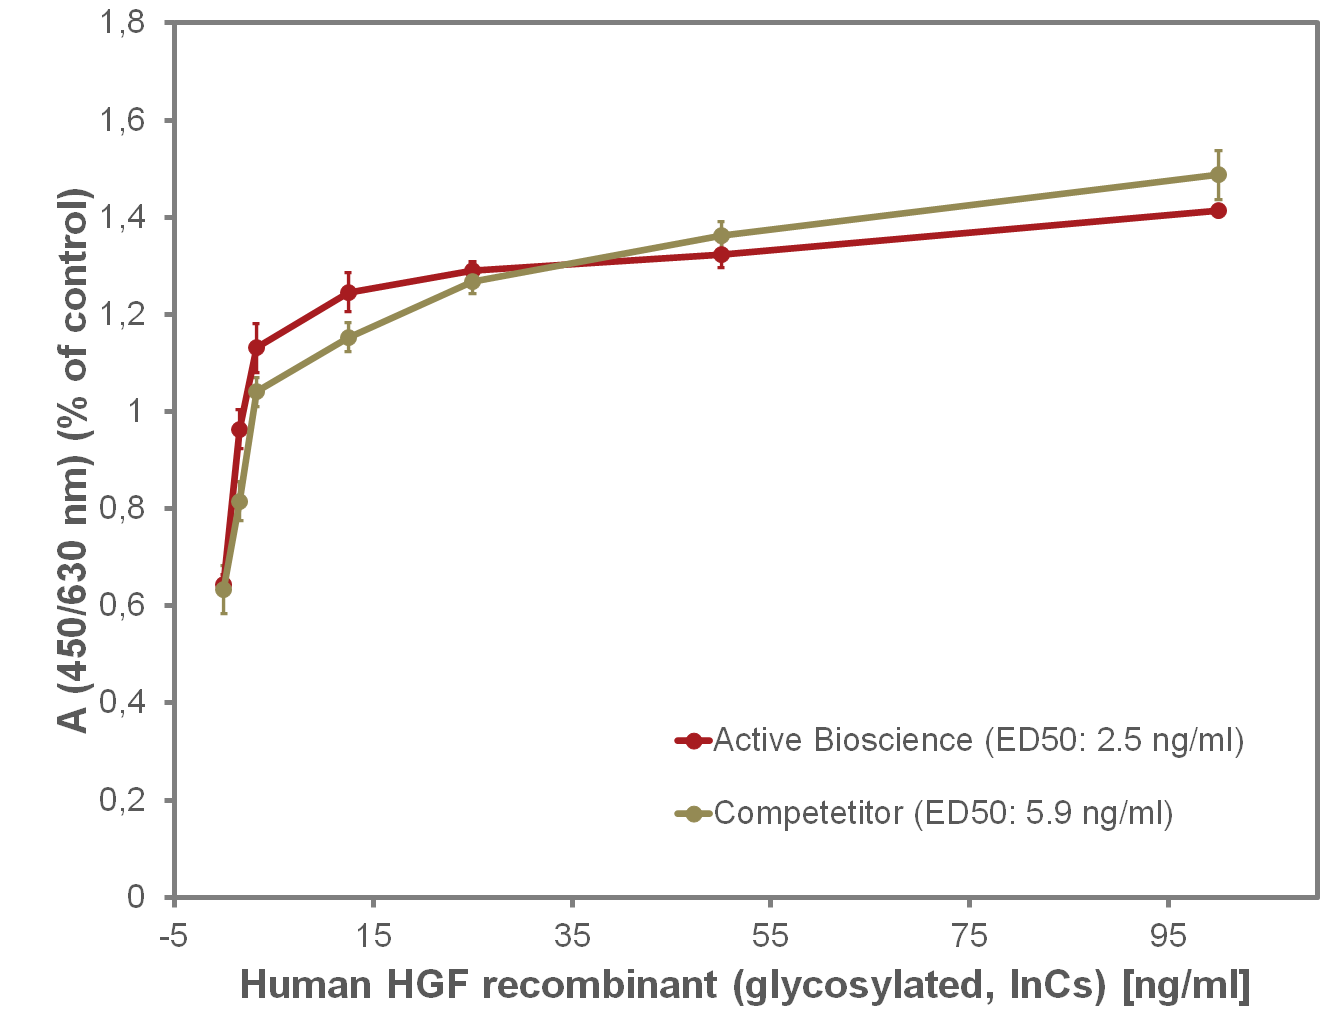 Fig 1: Measurement of scattering activity in MDCK cells by recombinant human HGF and a competitor. Values are the means (±SD) of triplicate determinations and expressed as percentage of control.